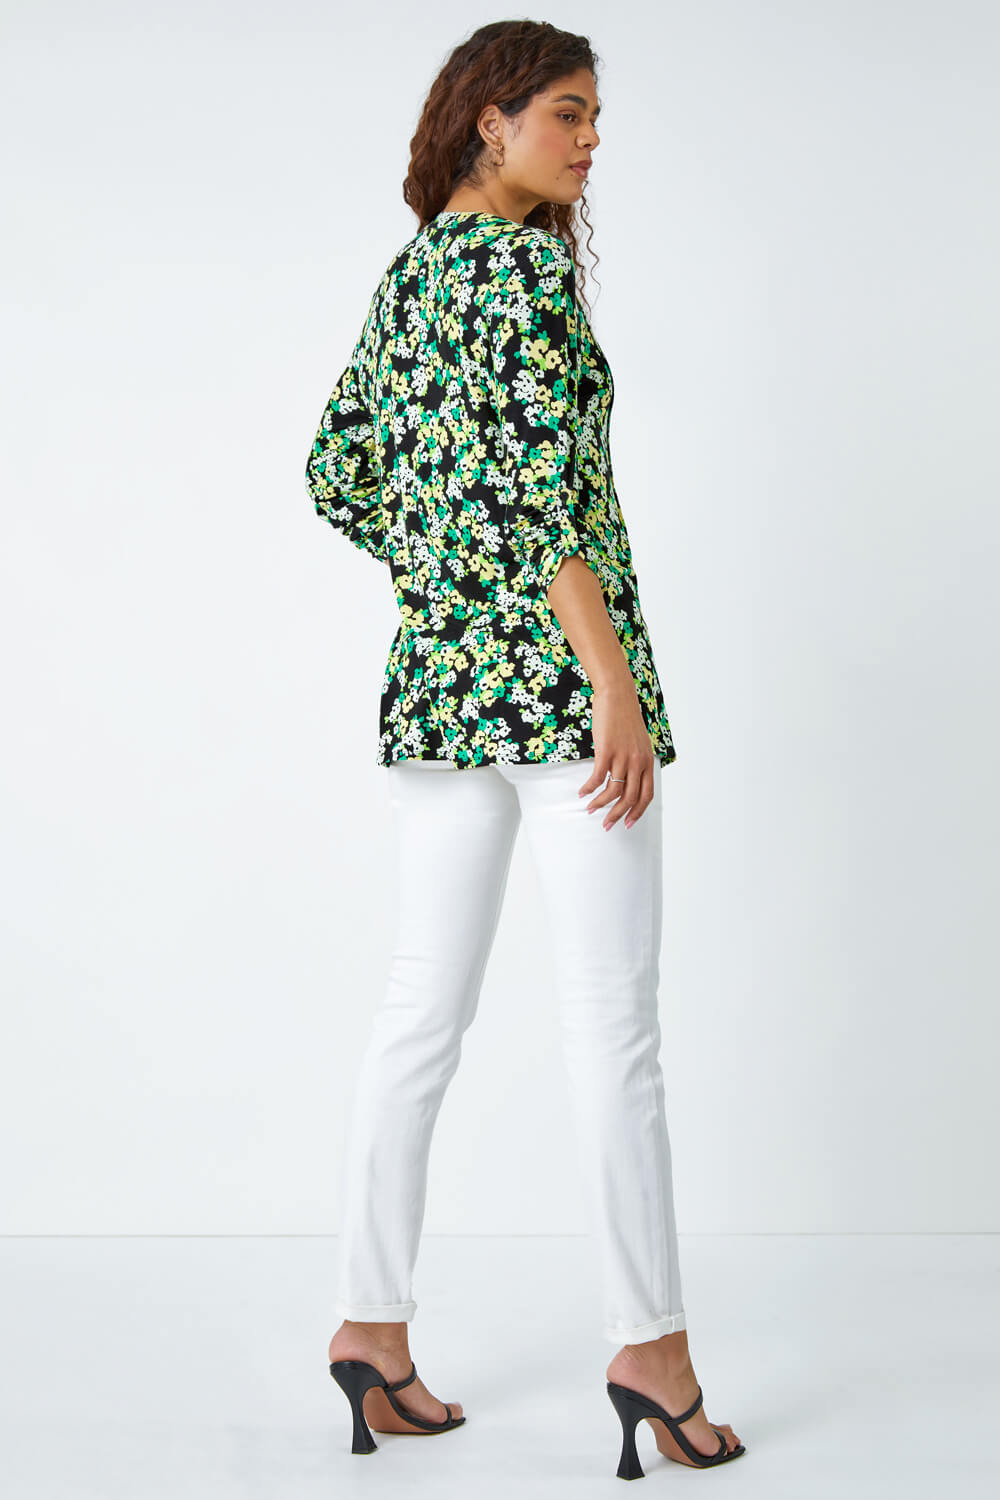 Green Floral Print Pintuck Stretch Top, Image 3 of 6